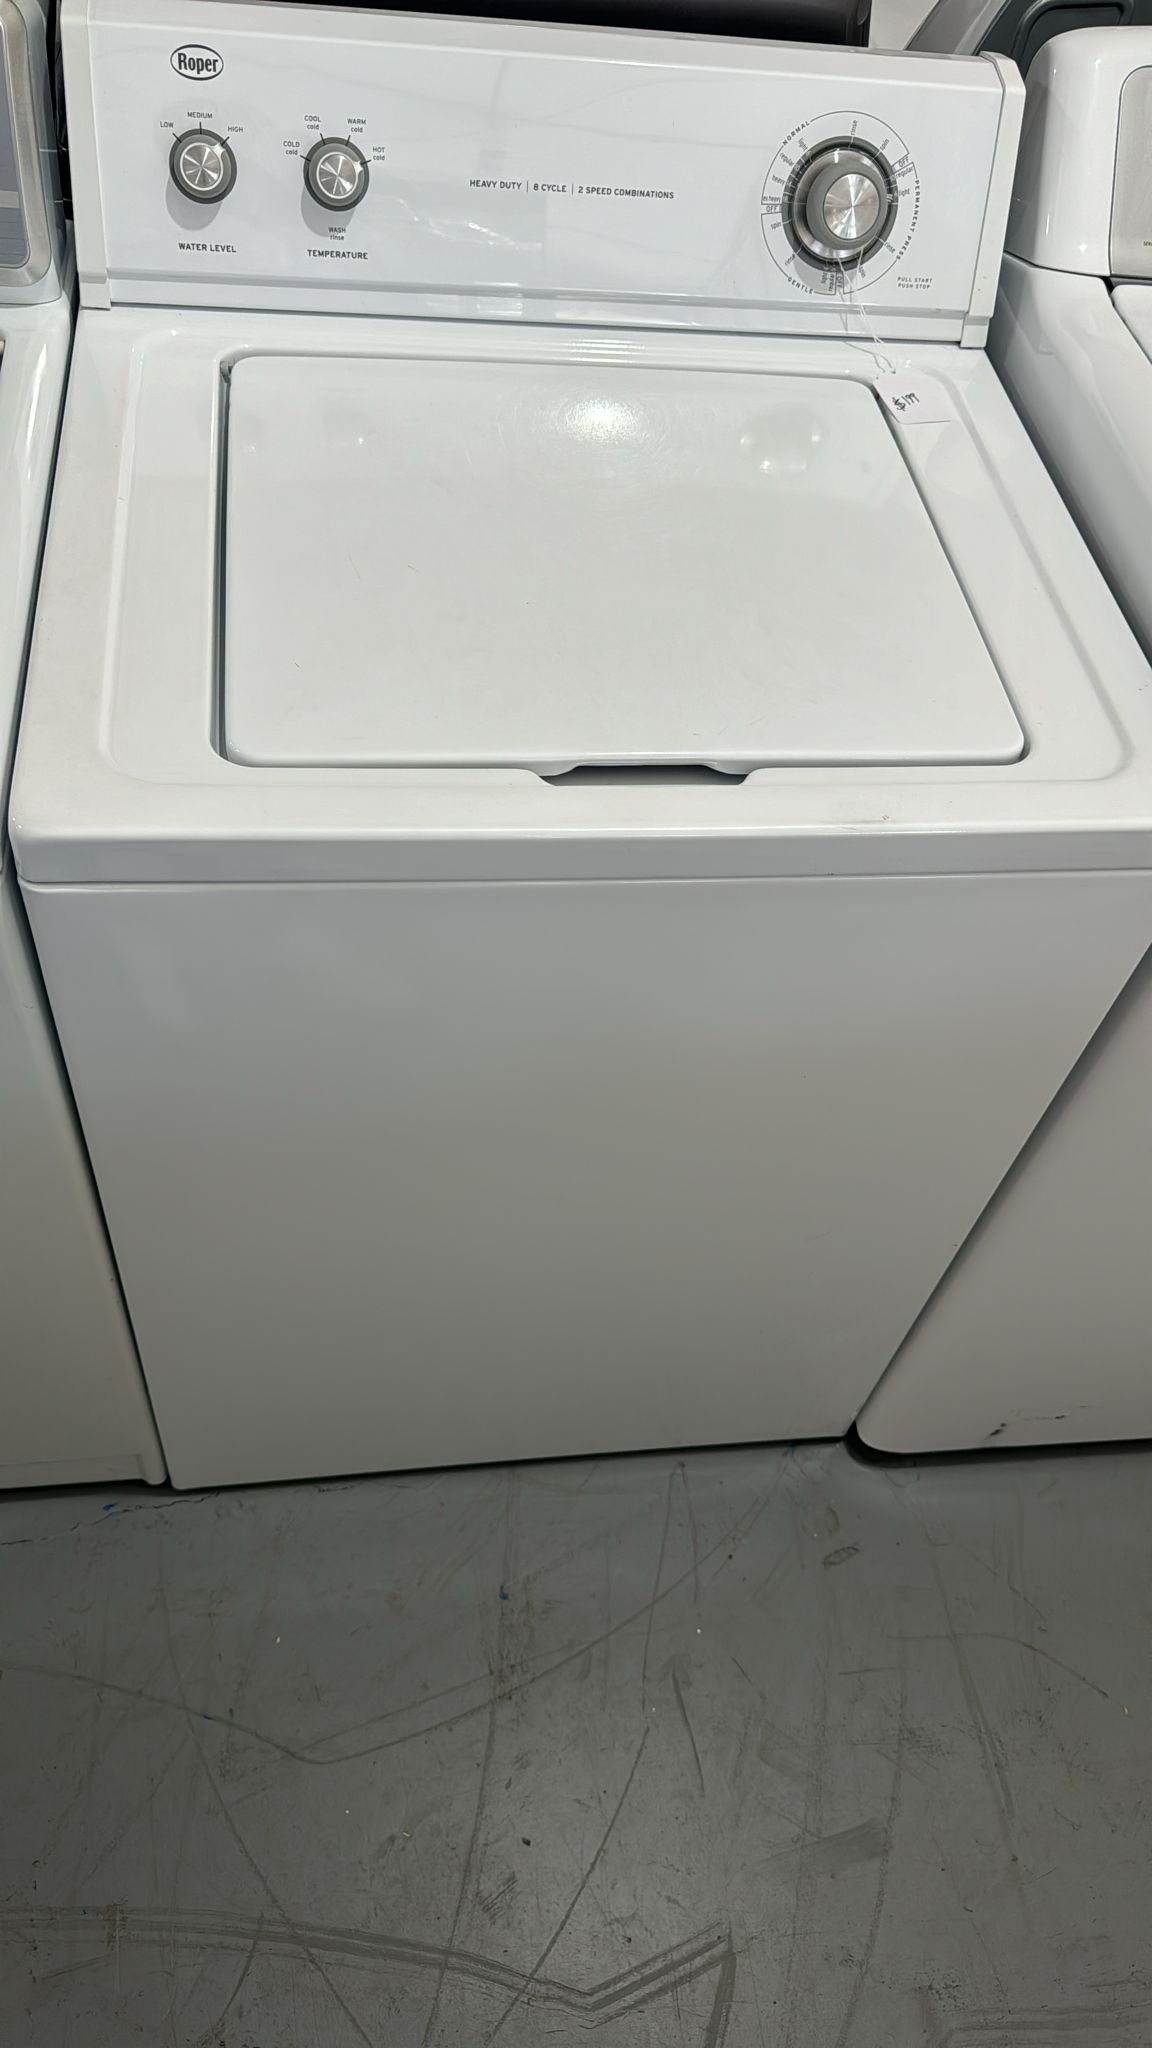 Roper Used Top Load Washer – White